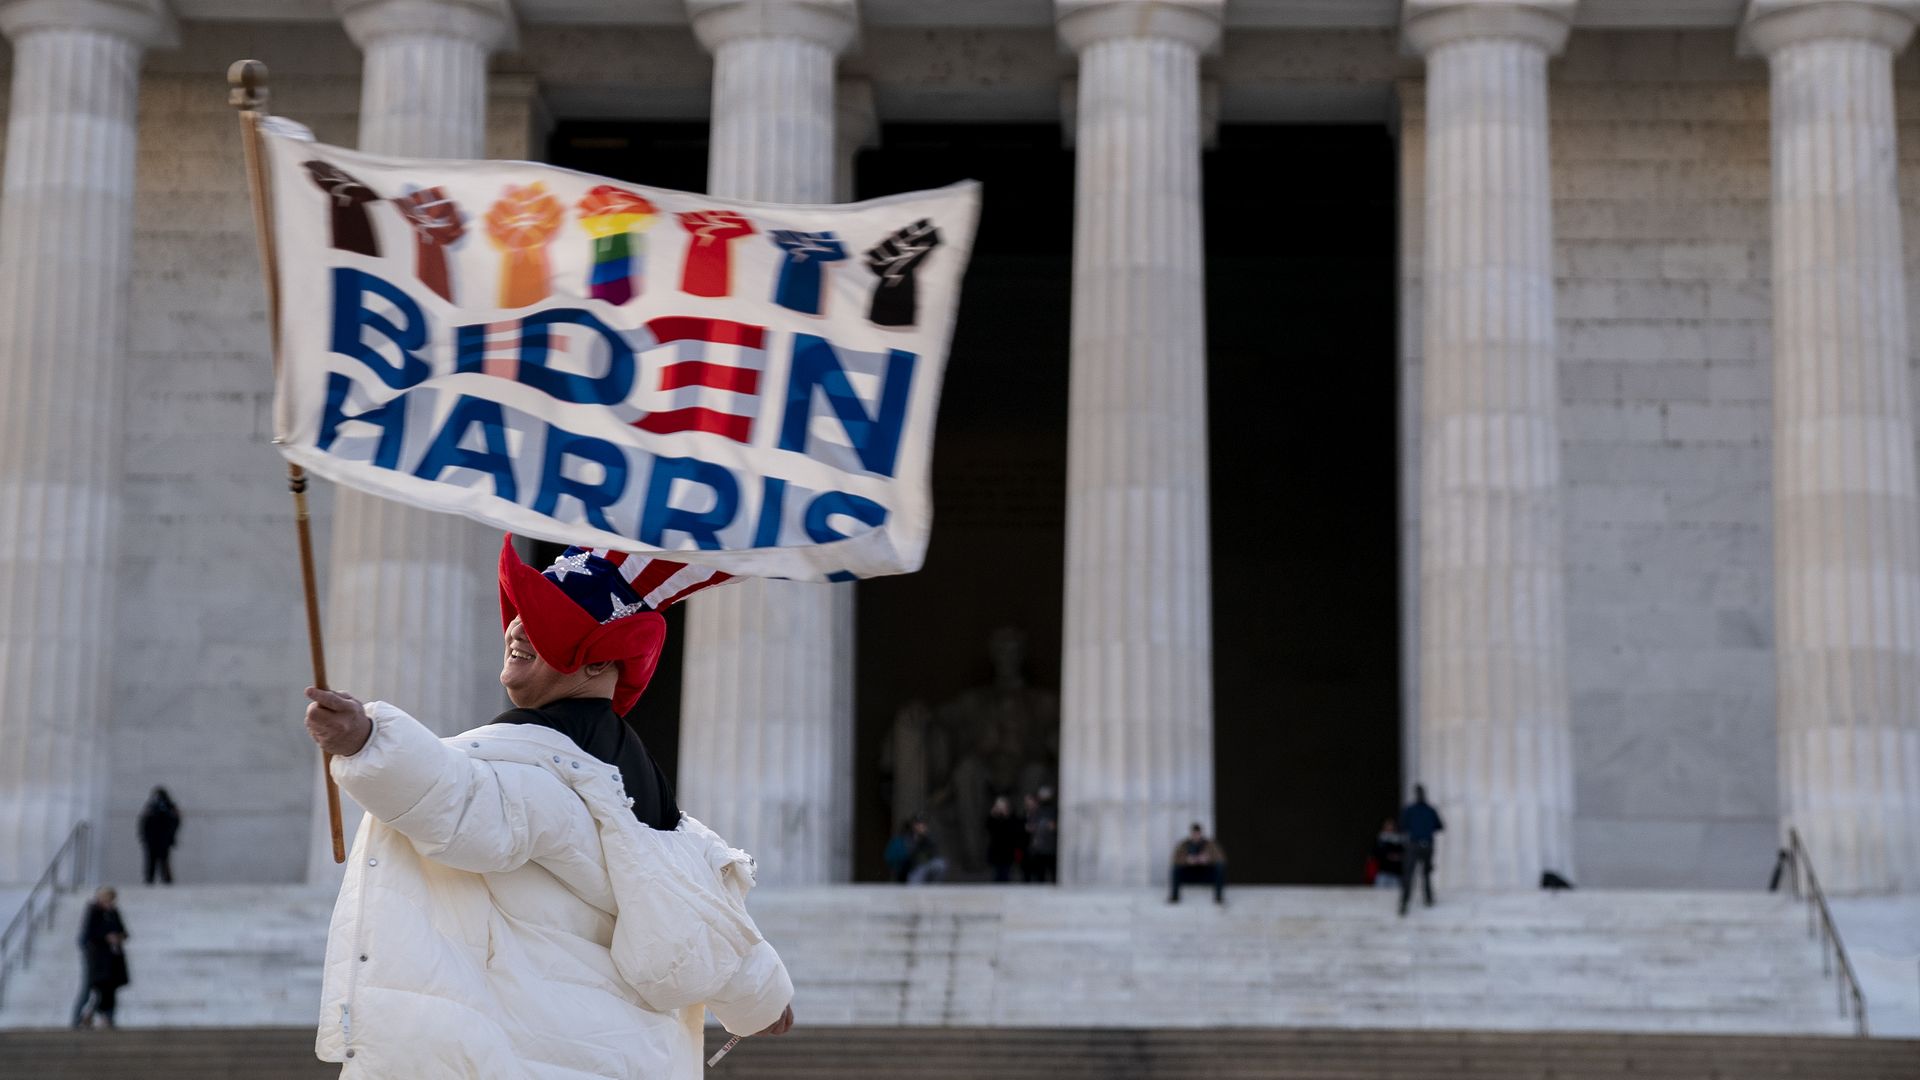 A reveler is seen with a Biden-Harris banner in front of the Lincoln Memorial.